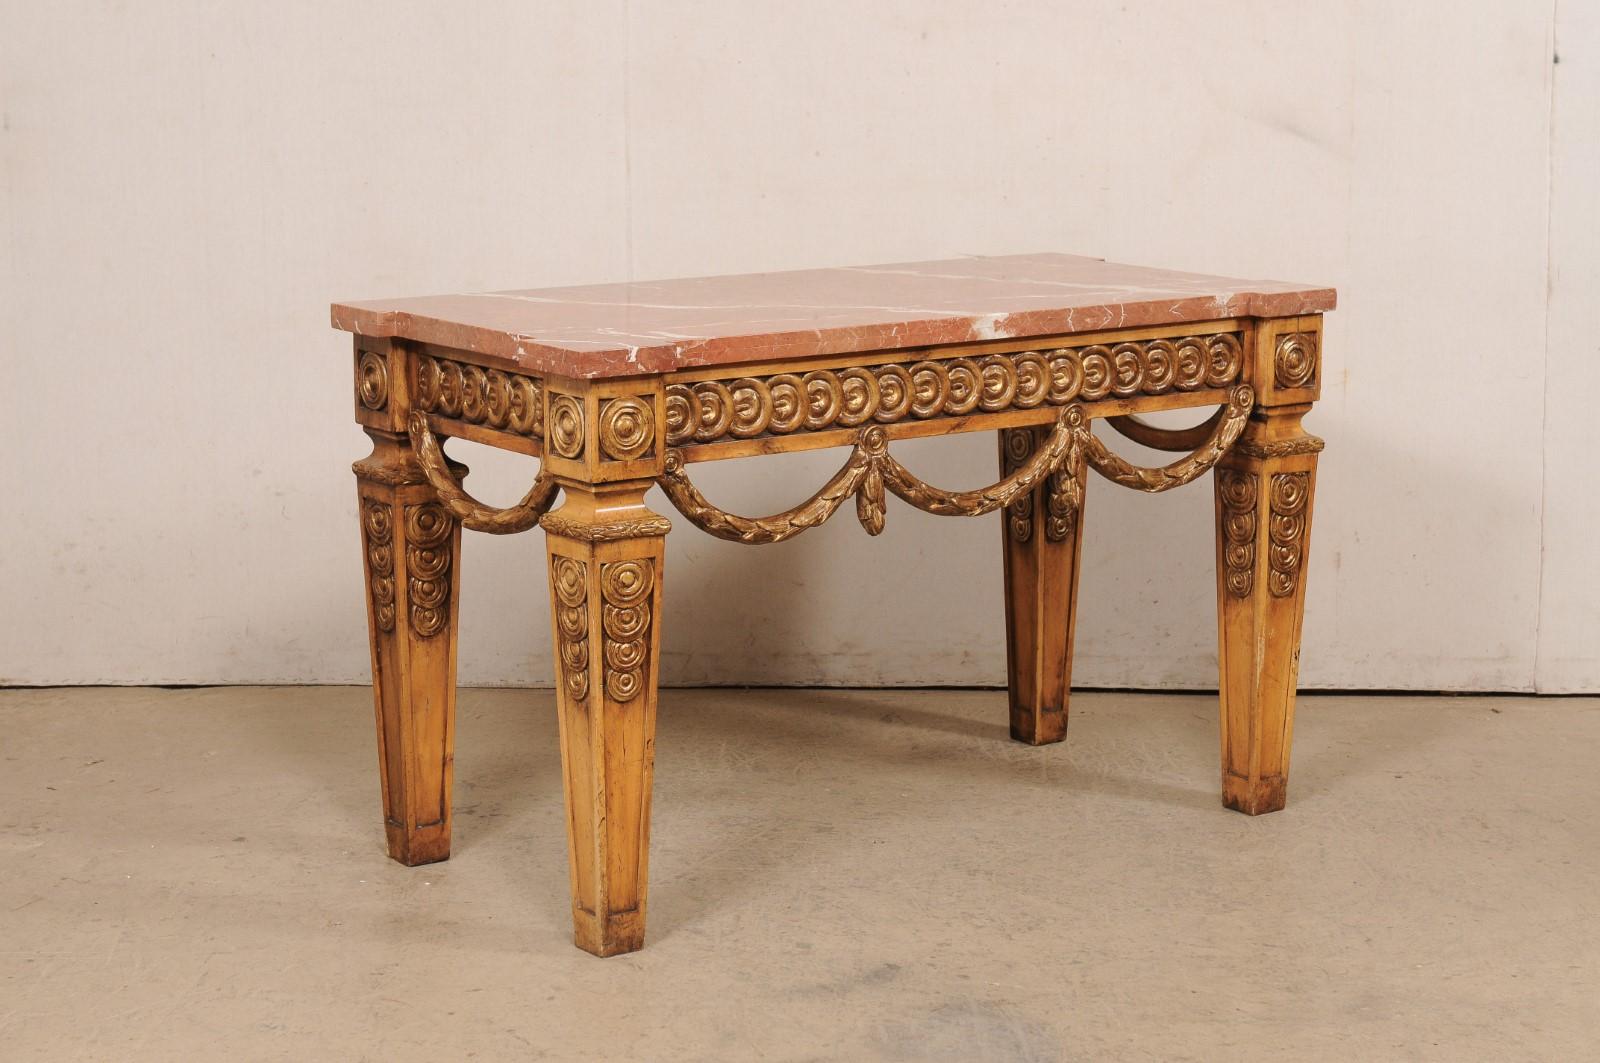 A large-scale American carved-wood console with marble top and garland swagged skirt. This vintage table made in America, features a rectangular-shaped marble top (with corners emphasized and squared outwardly), atop an apron adorn with overlapping